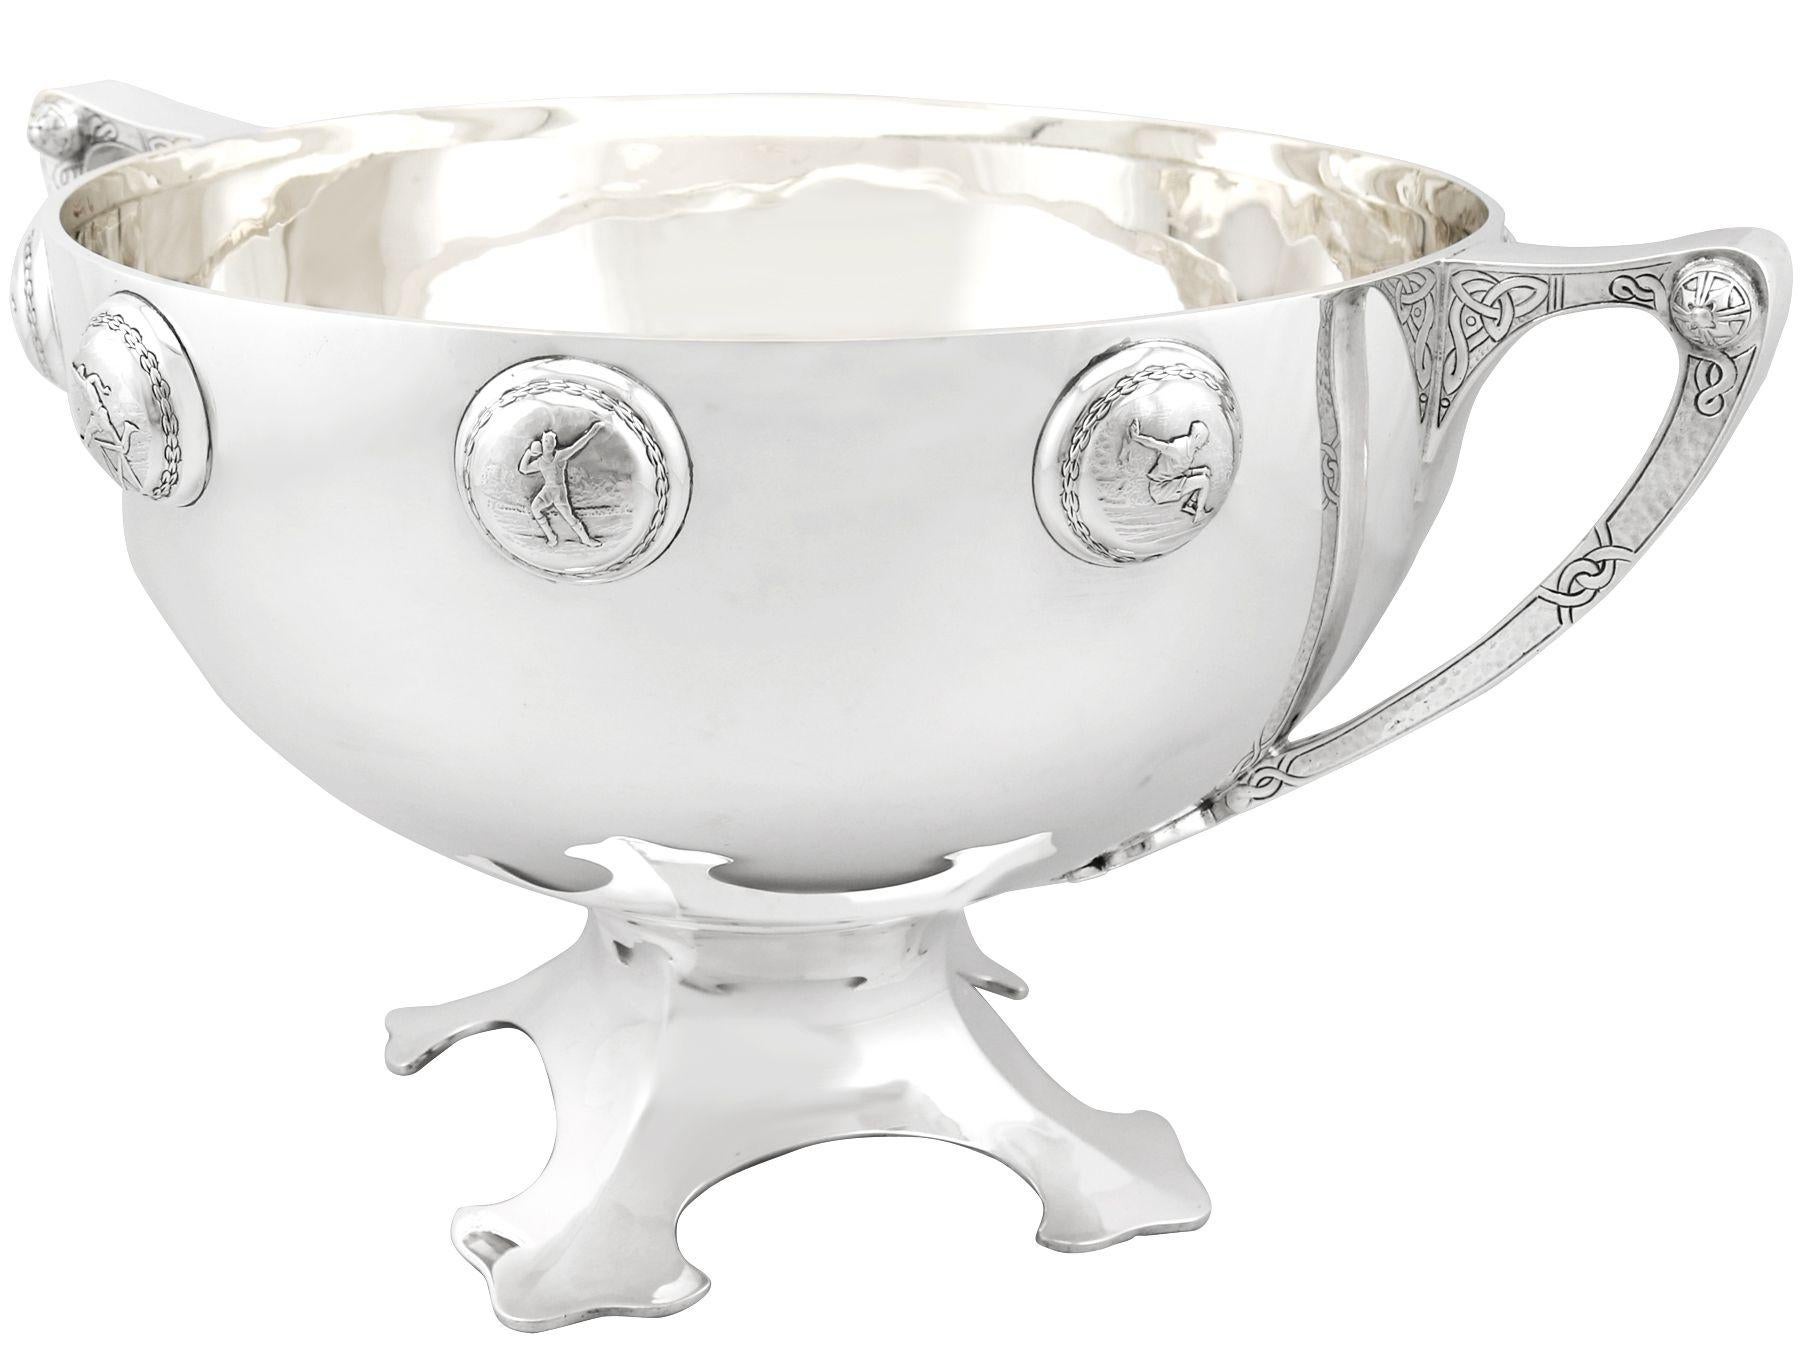 A magnificent, fine and impressive antique George VI English sterling silver presentation bowl with sporting interest, an addition to our 1930s ornamental silverware collection.

This exceptional antique 1930s sterling silver bowl has a circular